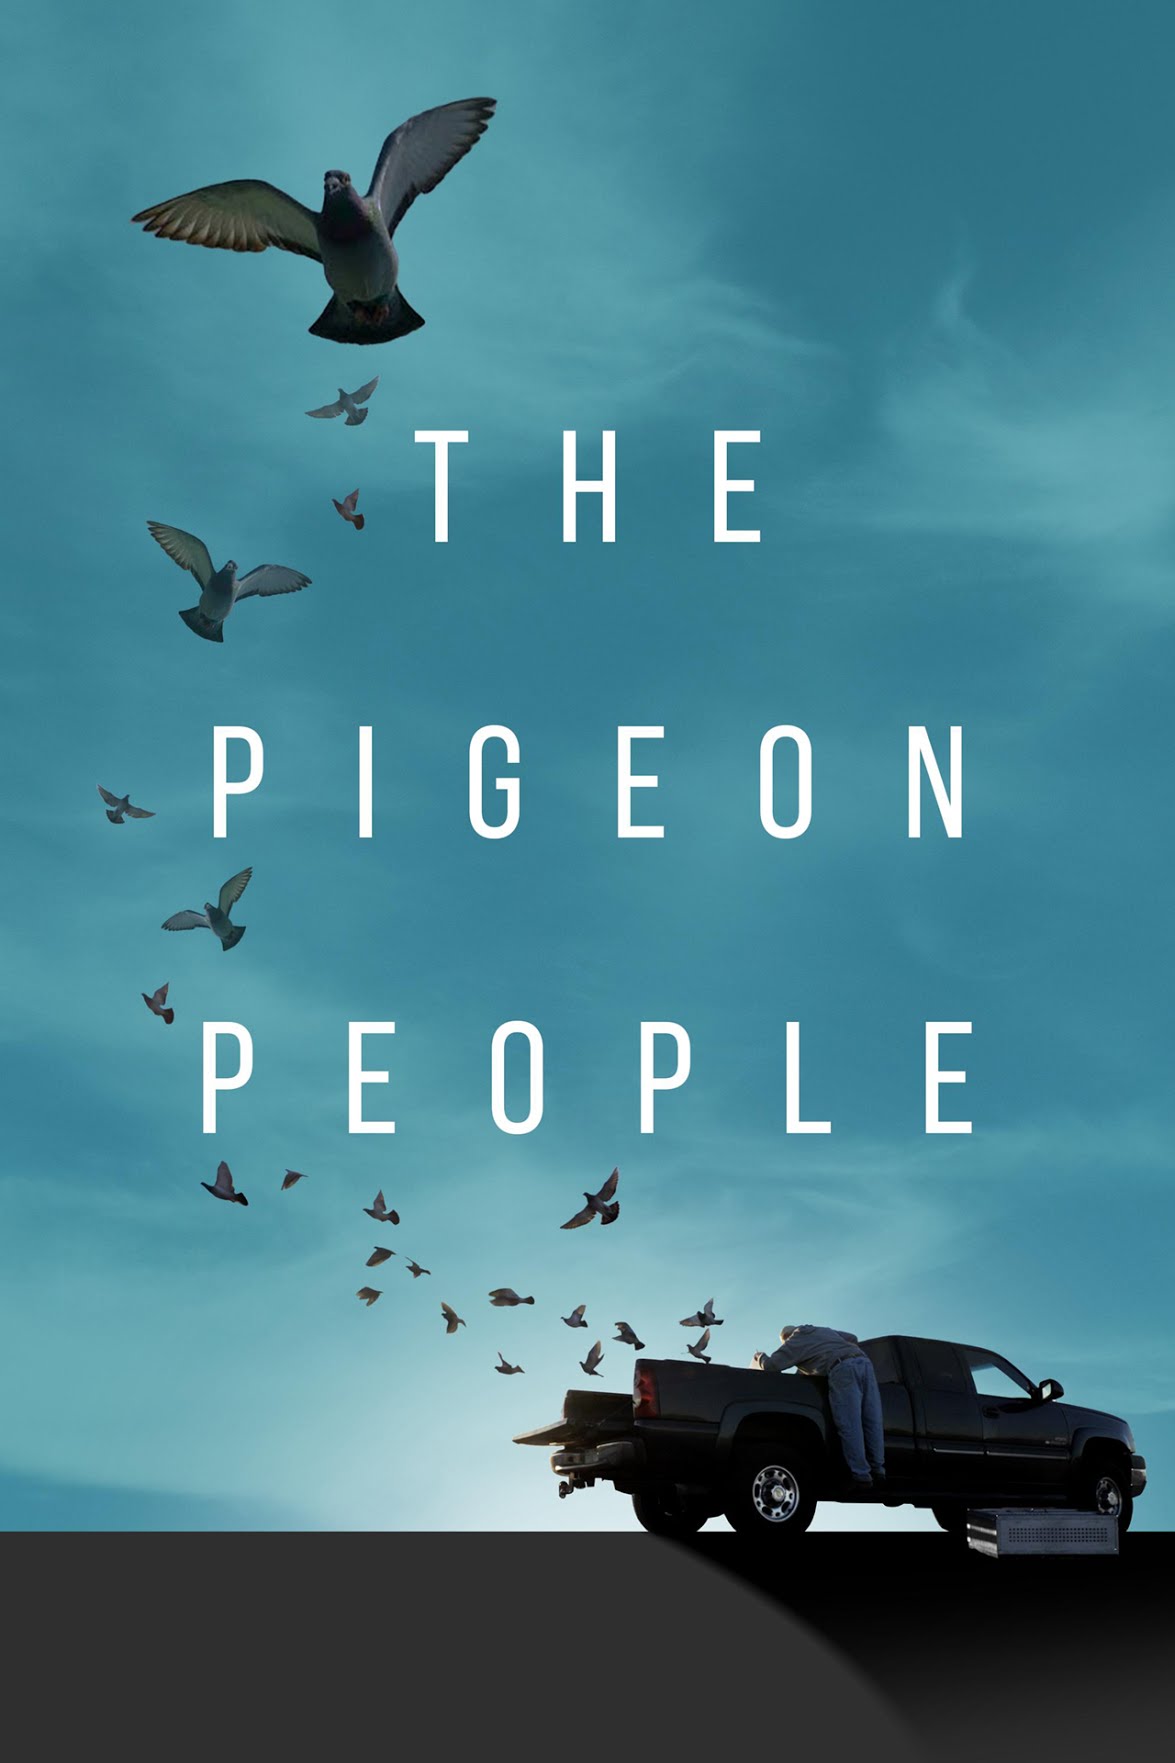 The Pigeon People documentary